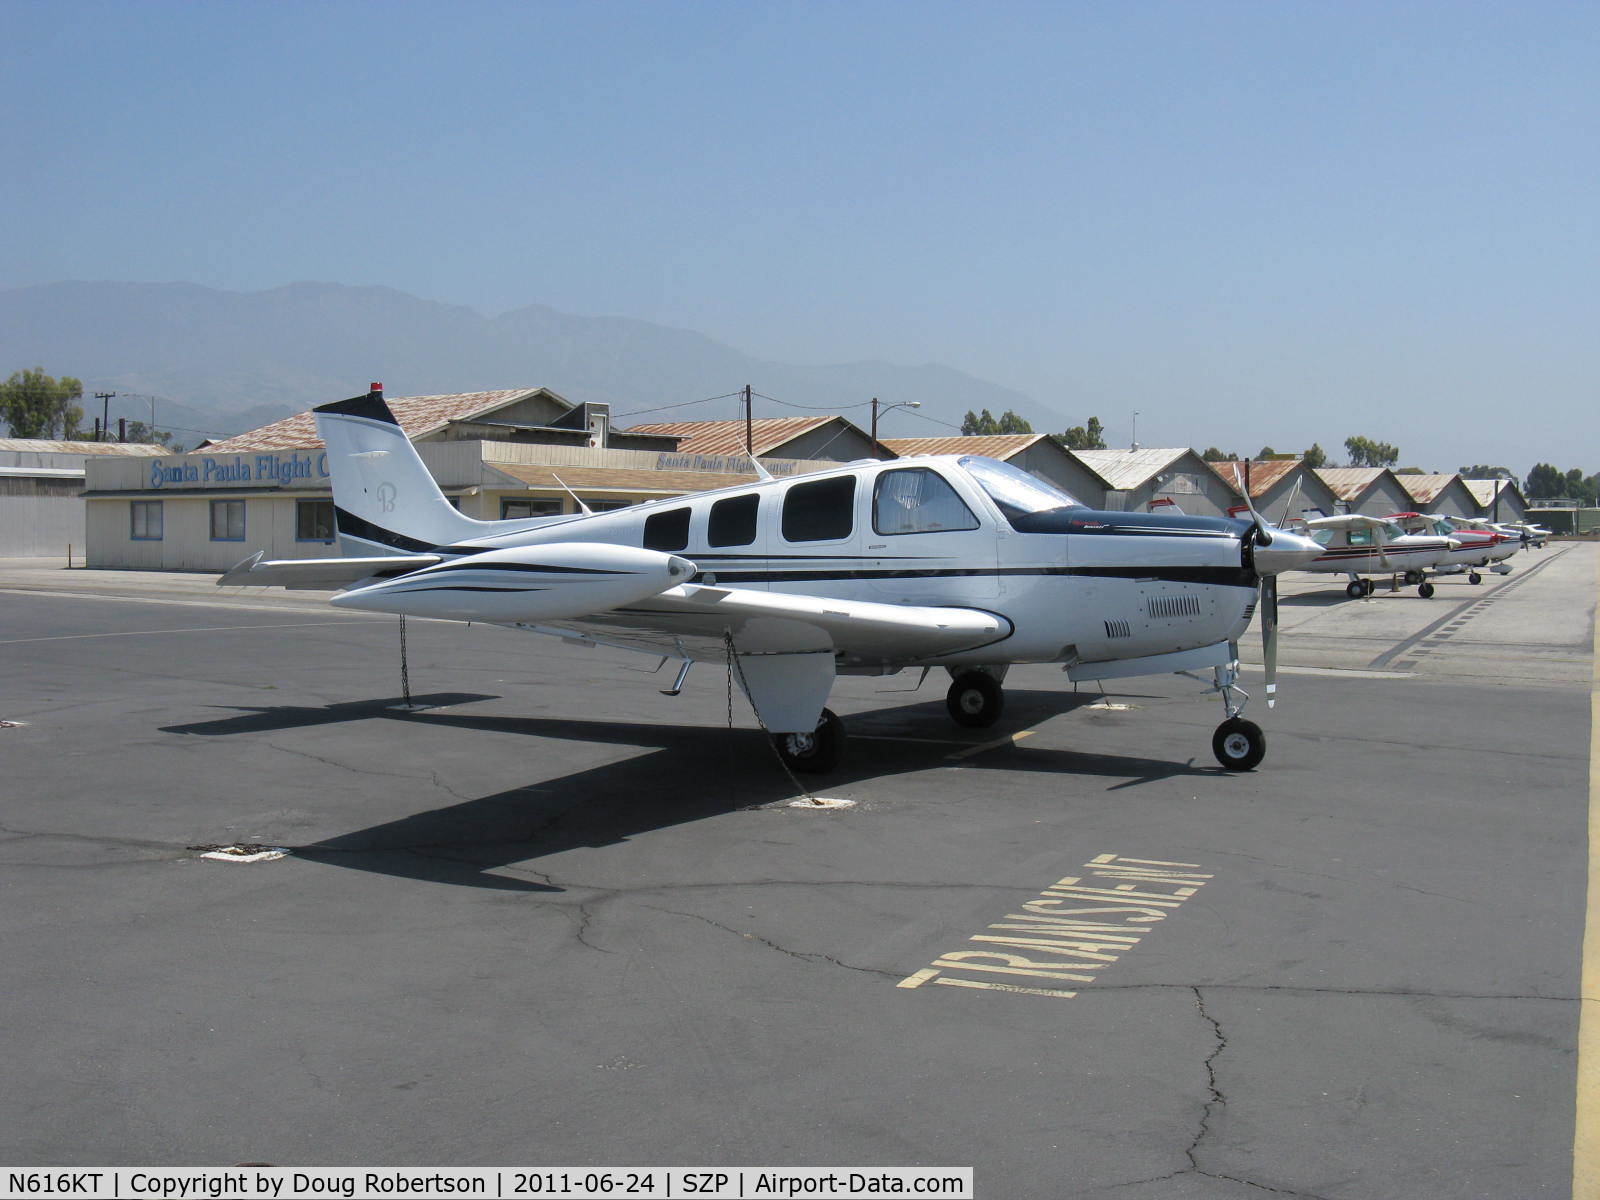 N616KT, Raytheon Aircraft Company G36 C/N E-3737, 2006 Raytheon Beech G36 BONANZA, Continental IO-550-B 300 Hp with altitude-compensating fuel pump for automatic mixture control